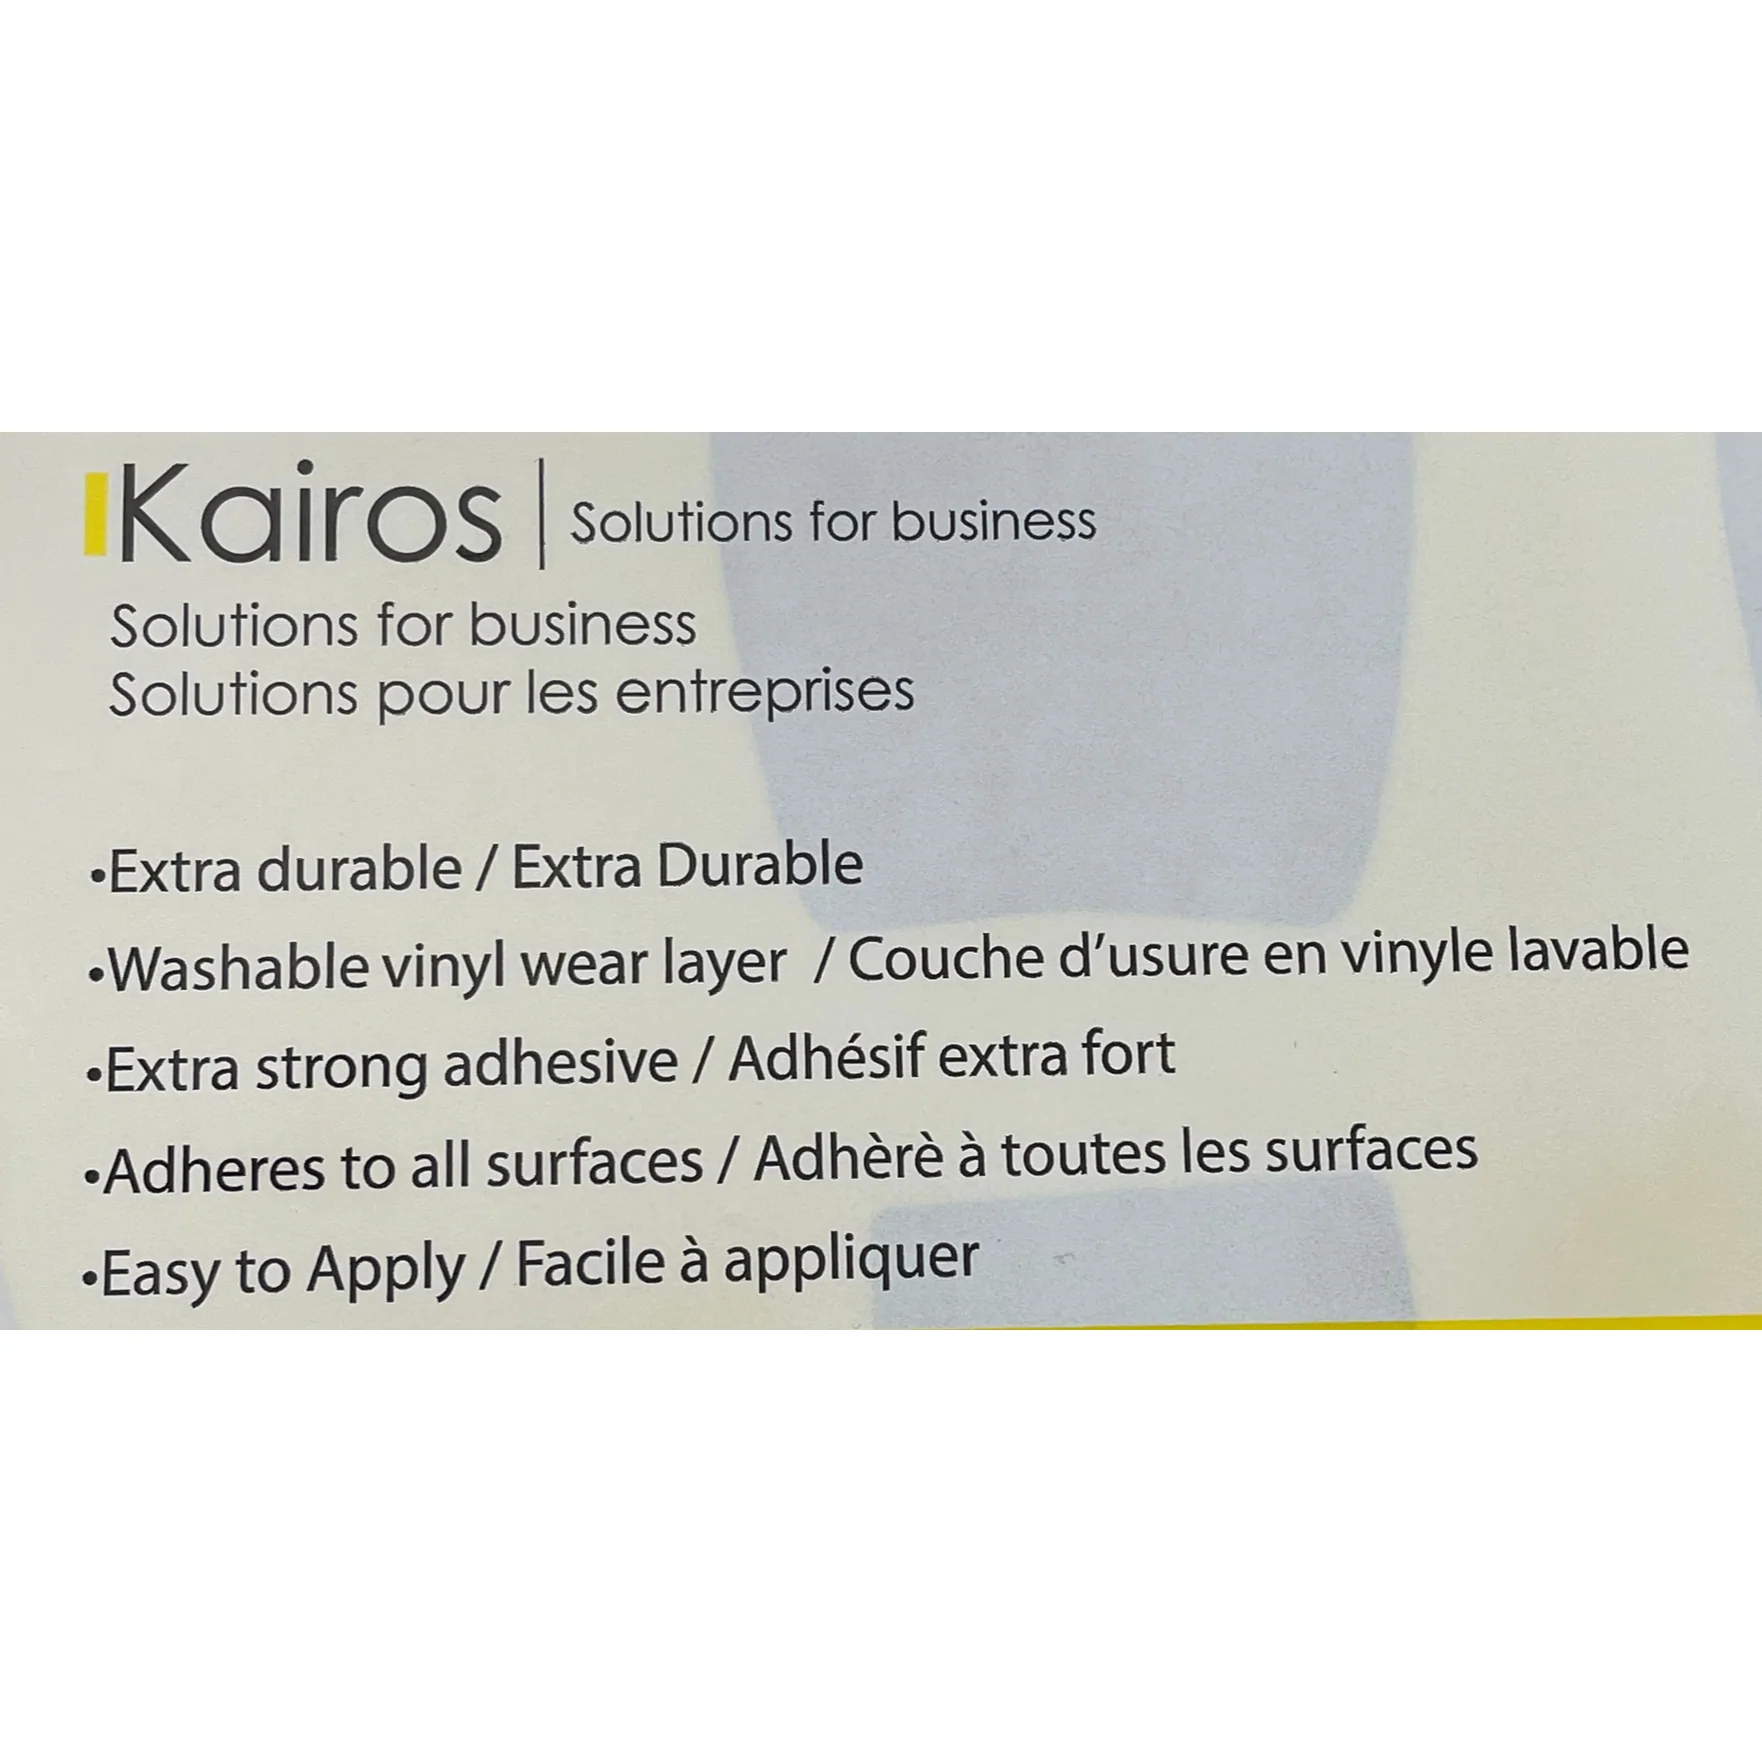 Kairos Physical Distancing Decals / "Please Wait Here" Floor Stickers / English & French / Pack of 7 / Bright Yellow